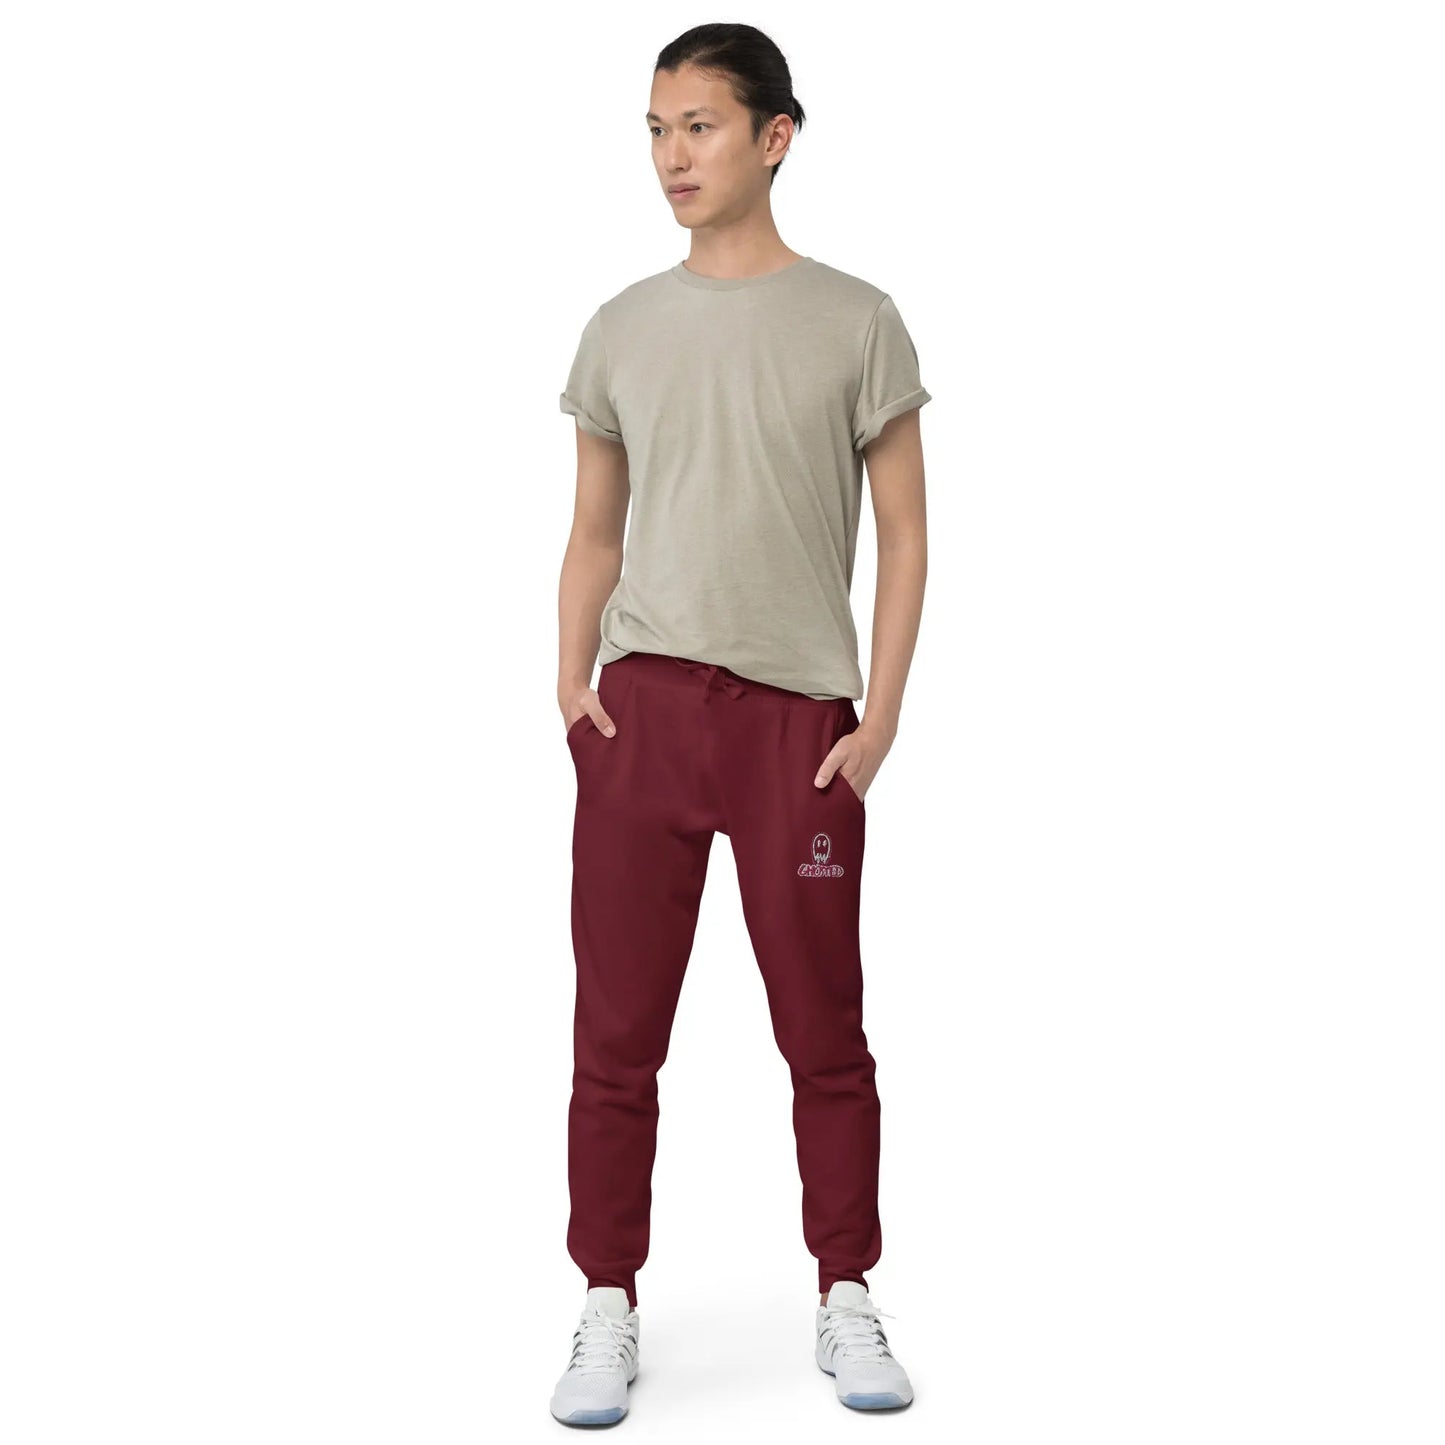 Ghosted Sweatpants - Image #5